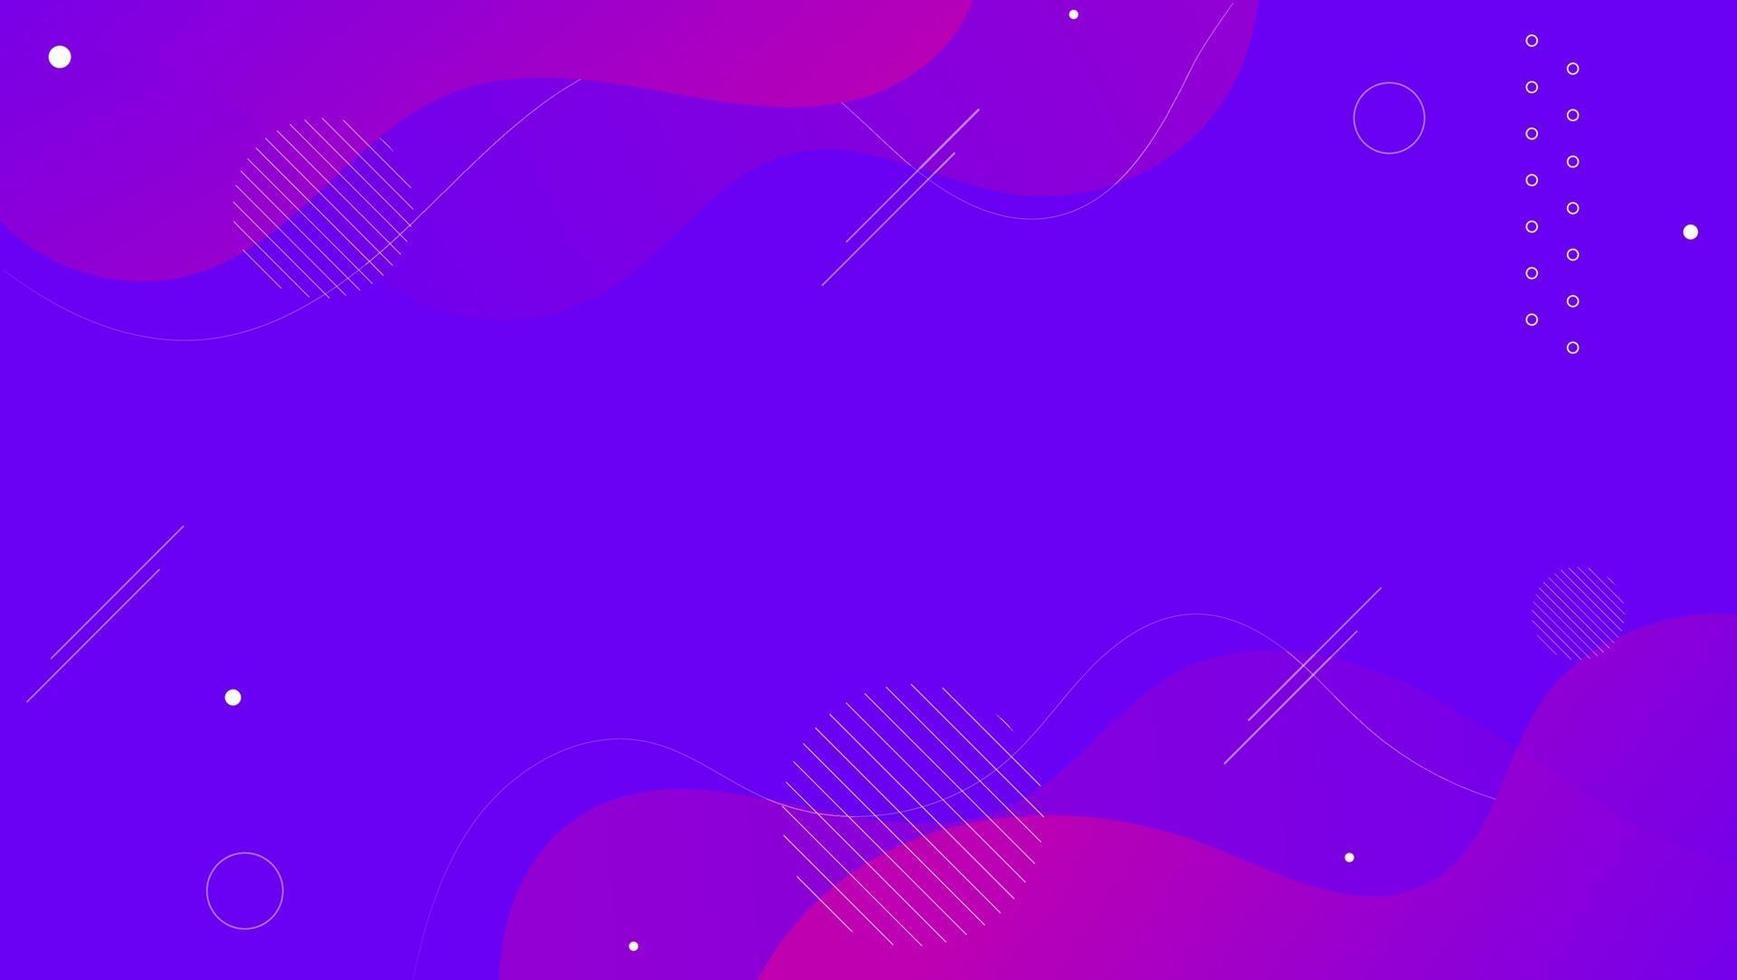 Modern Abstract Dynamic Violet Liquid Wave Background Design vector